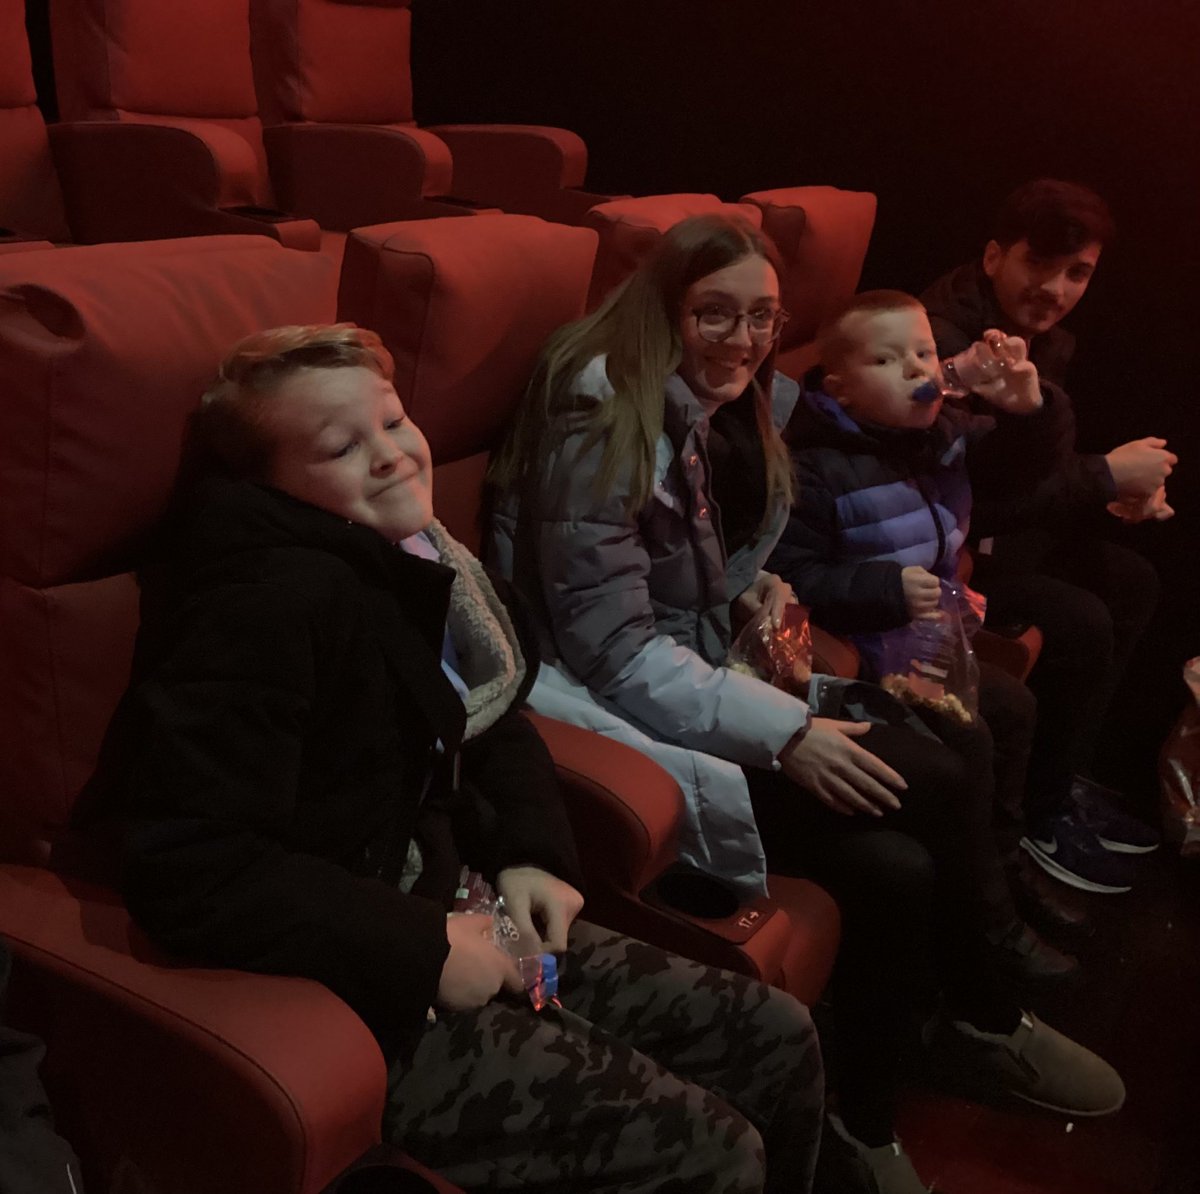 We enjoyed a morning at the cinema this week to watch ‘Paw Patrol The Mighty Movie’ 🍿🎬 #IntoFilmFestival